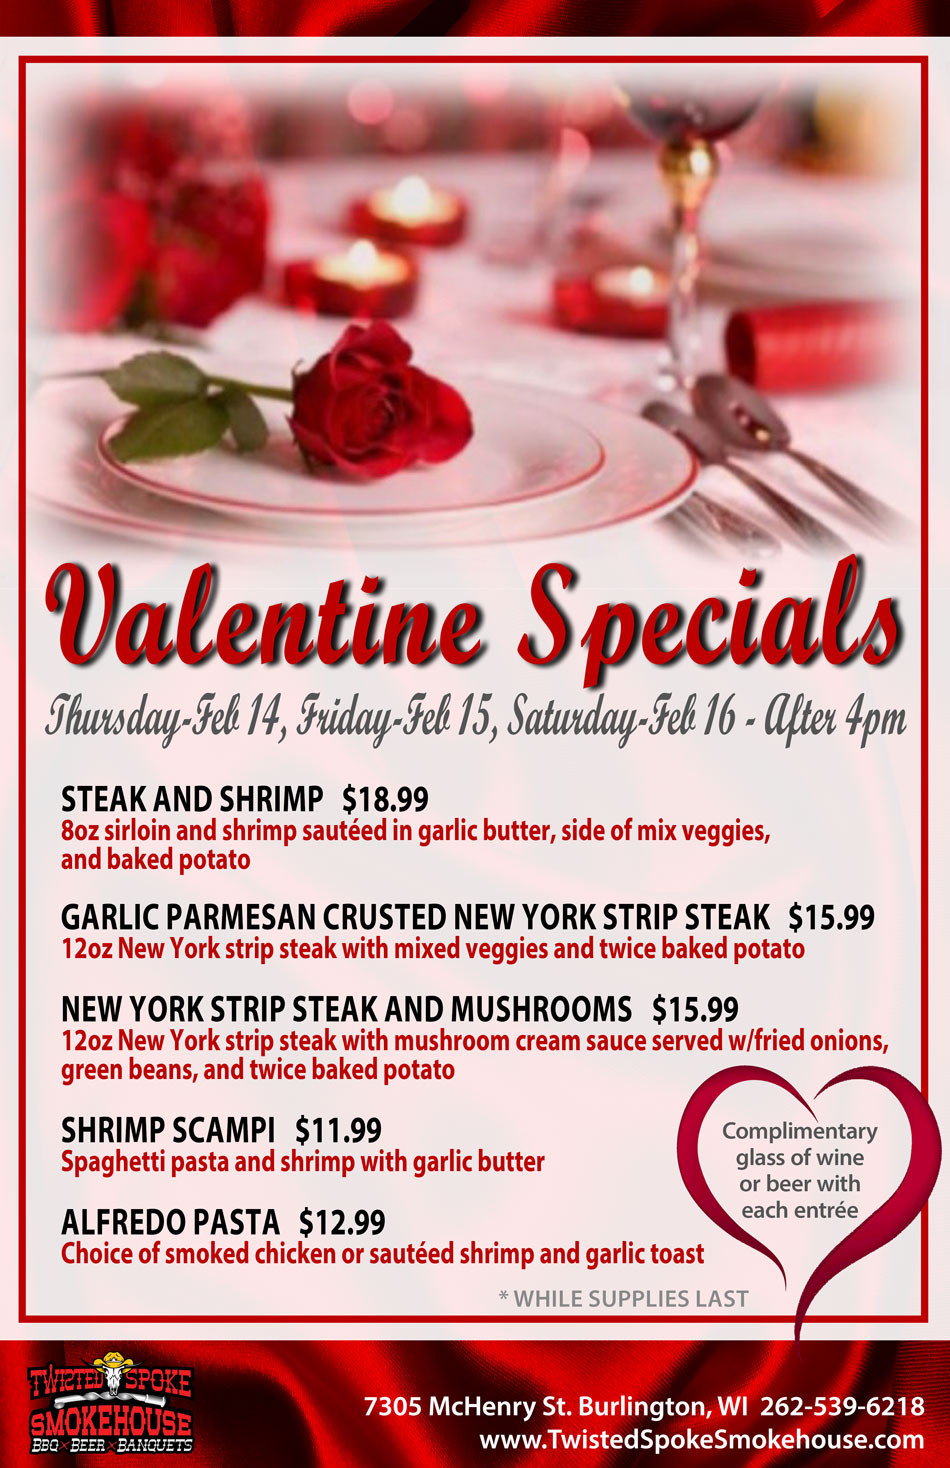 Valentines Dinner Special
 Valentine Dinner Specials at Twisted Spoke Smokehouse